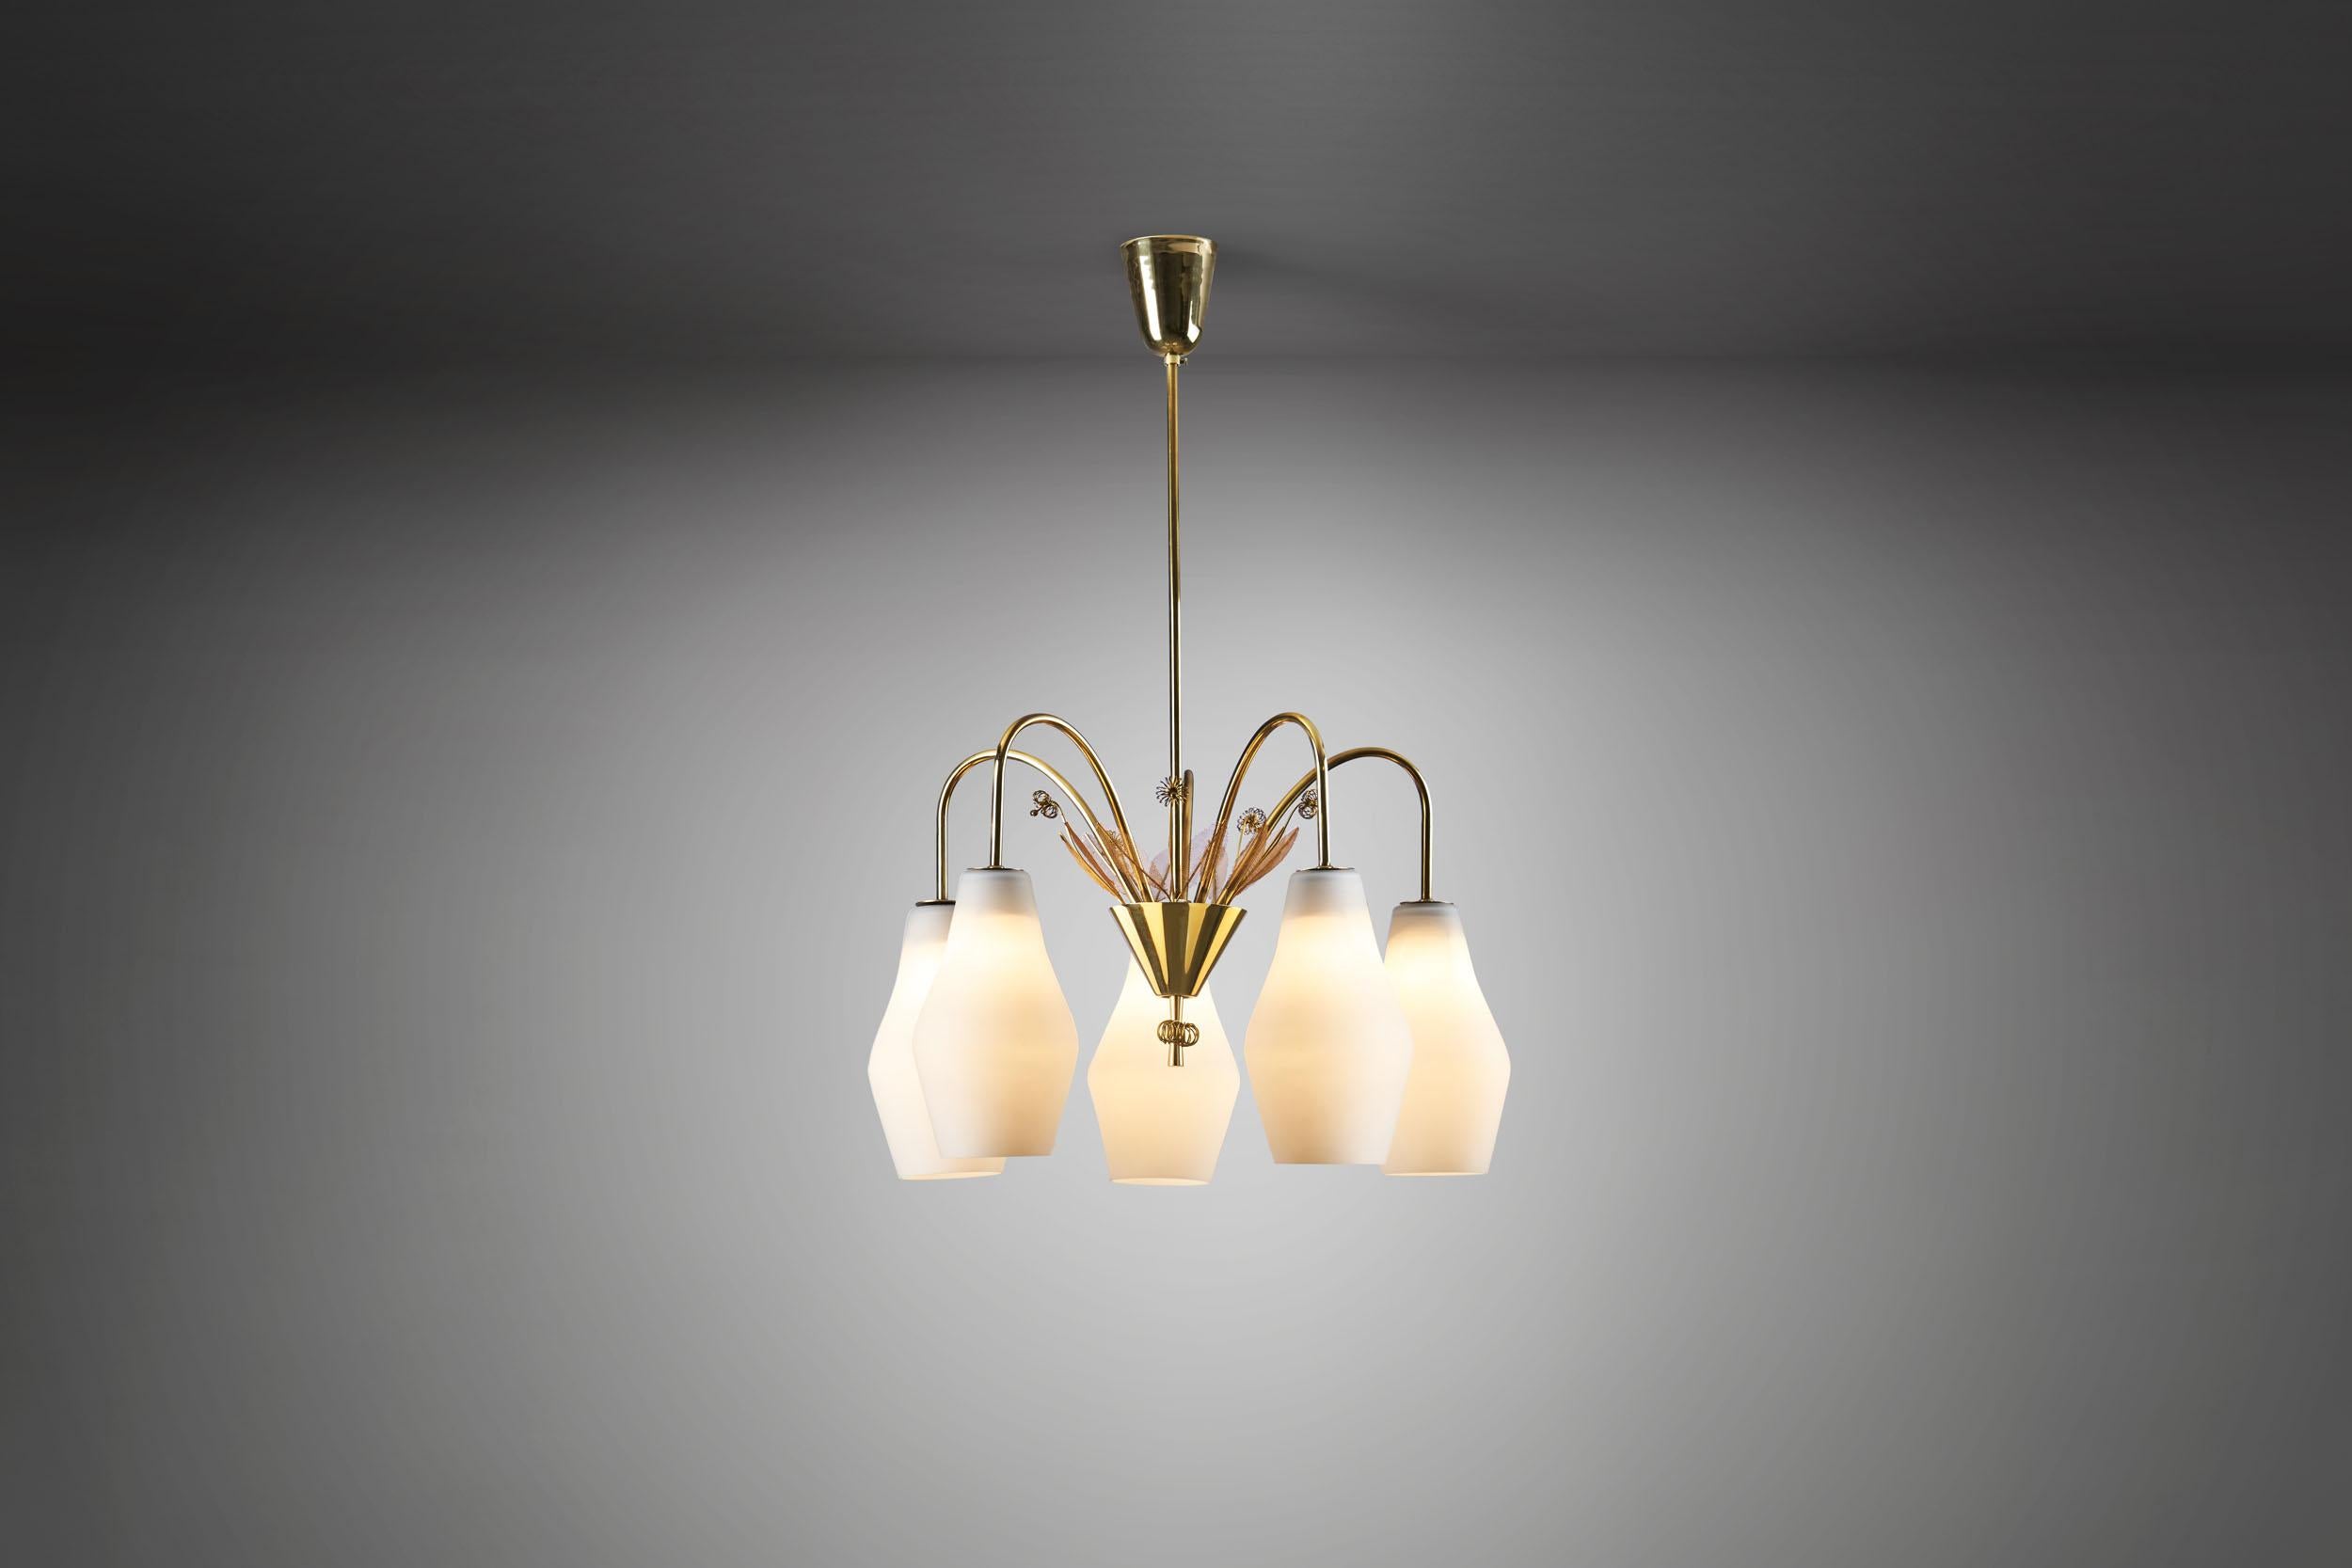 This beautiful brass and glass chandelier belongs to the legendary Finnish lighting designer, Paavo Tynell’s more decorated models of the 1950s. This model is quite rare in Tynell’s repertoire, and could only be compared to a custom commission for a